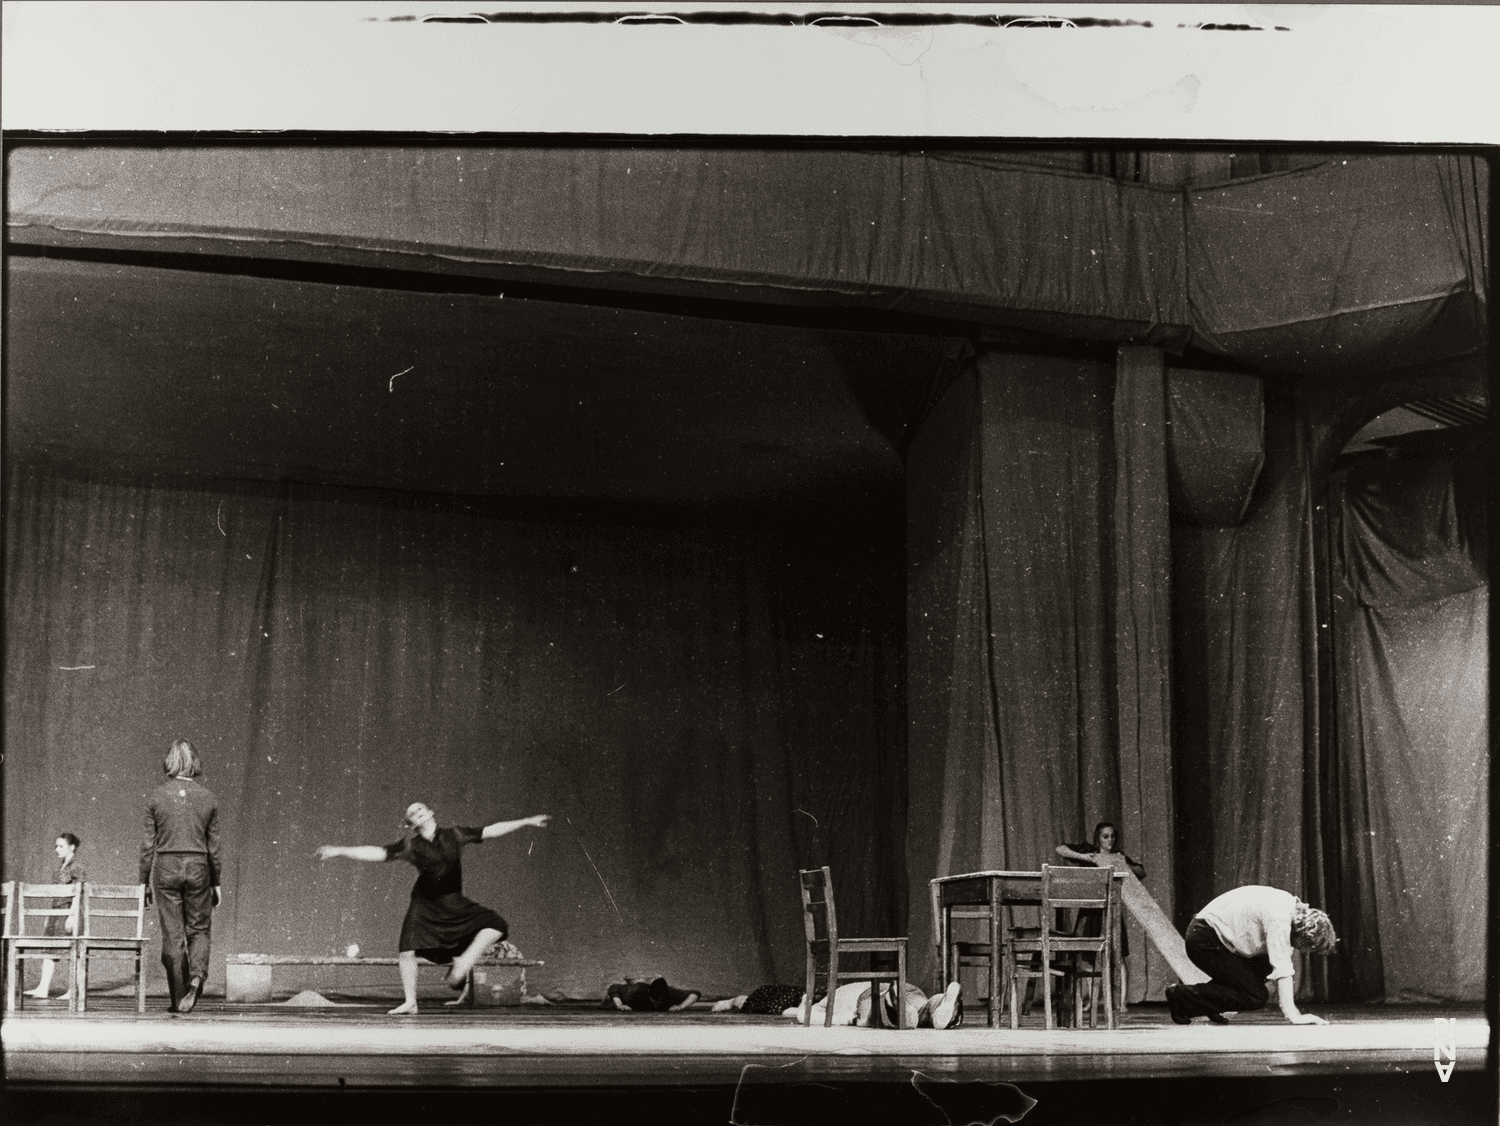 Dominique Mercy, Josephine Ann Endicott and Vivienne Newport in “Adagio – Five Songs by Gustav Mahler” by Pina Bausch